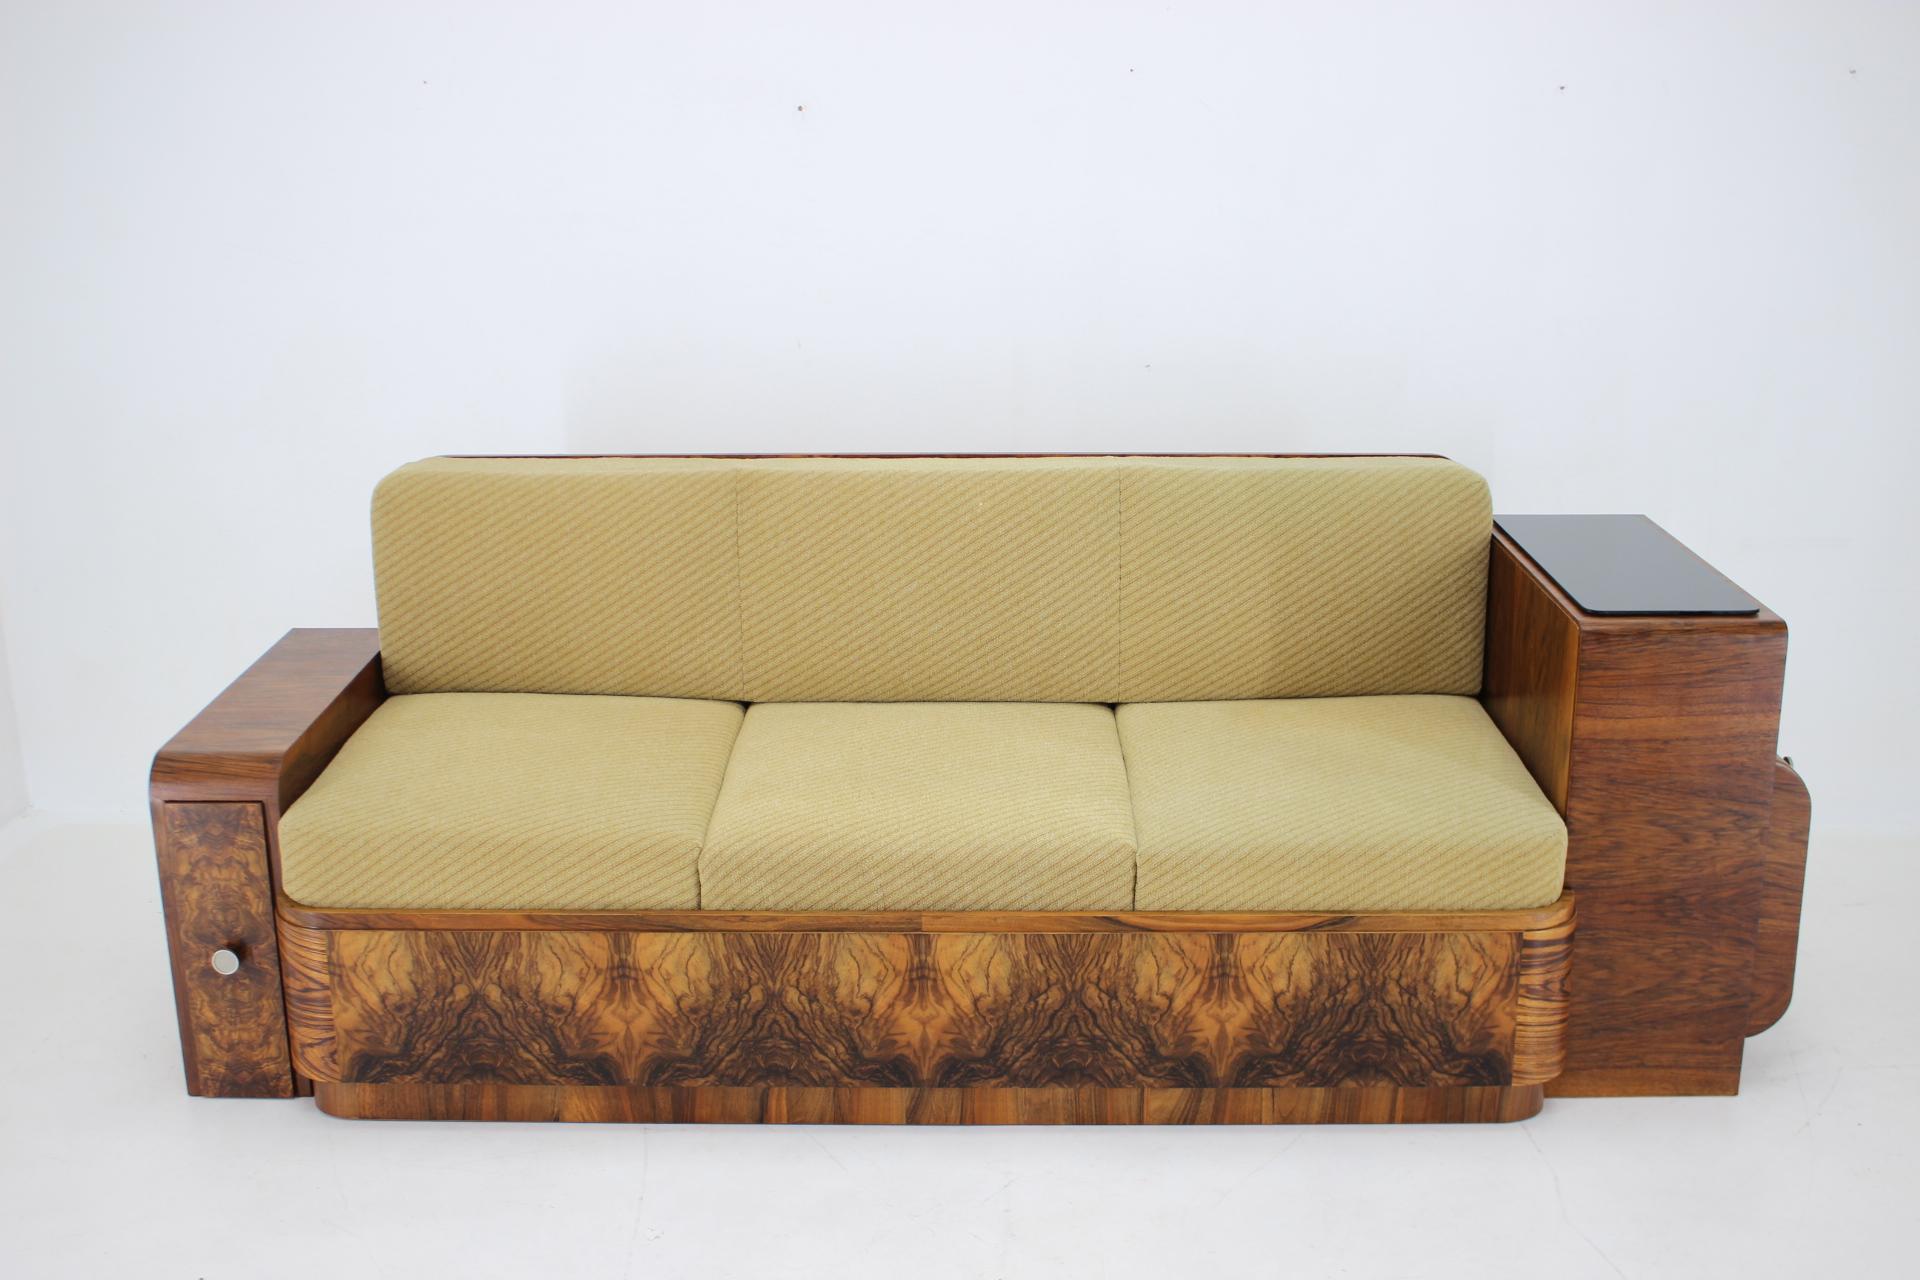 - Carefully refurbished wooden parts
 - The fabric upholstery in good condition with some signs of use 
- Convertible to bed
- Dimensions: 86 (47) 250 88 - 125 (46)